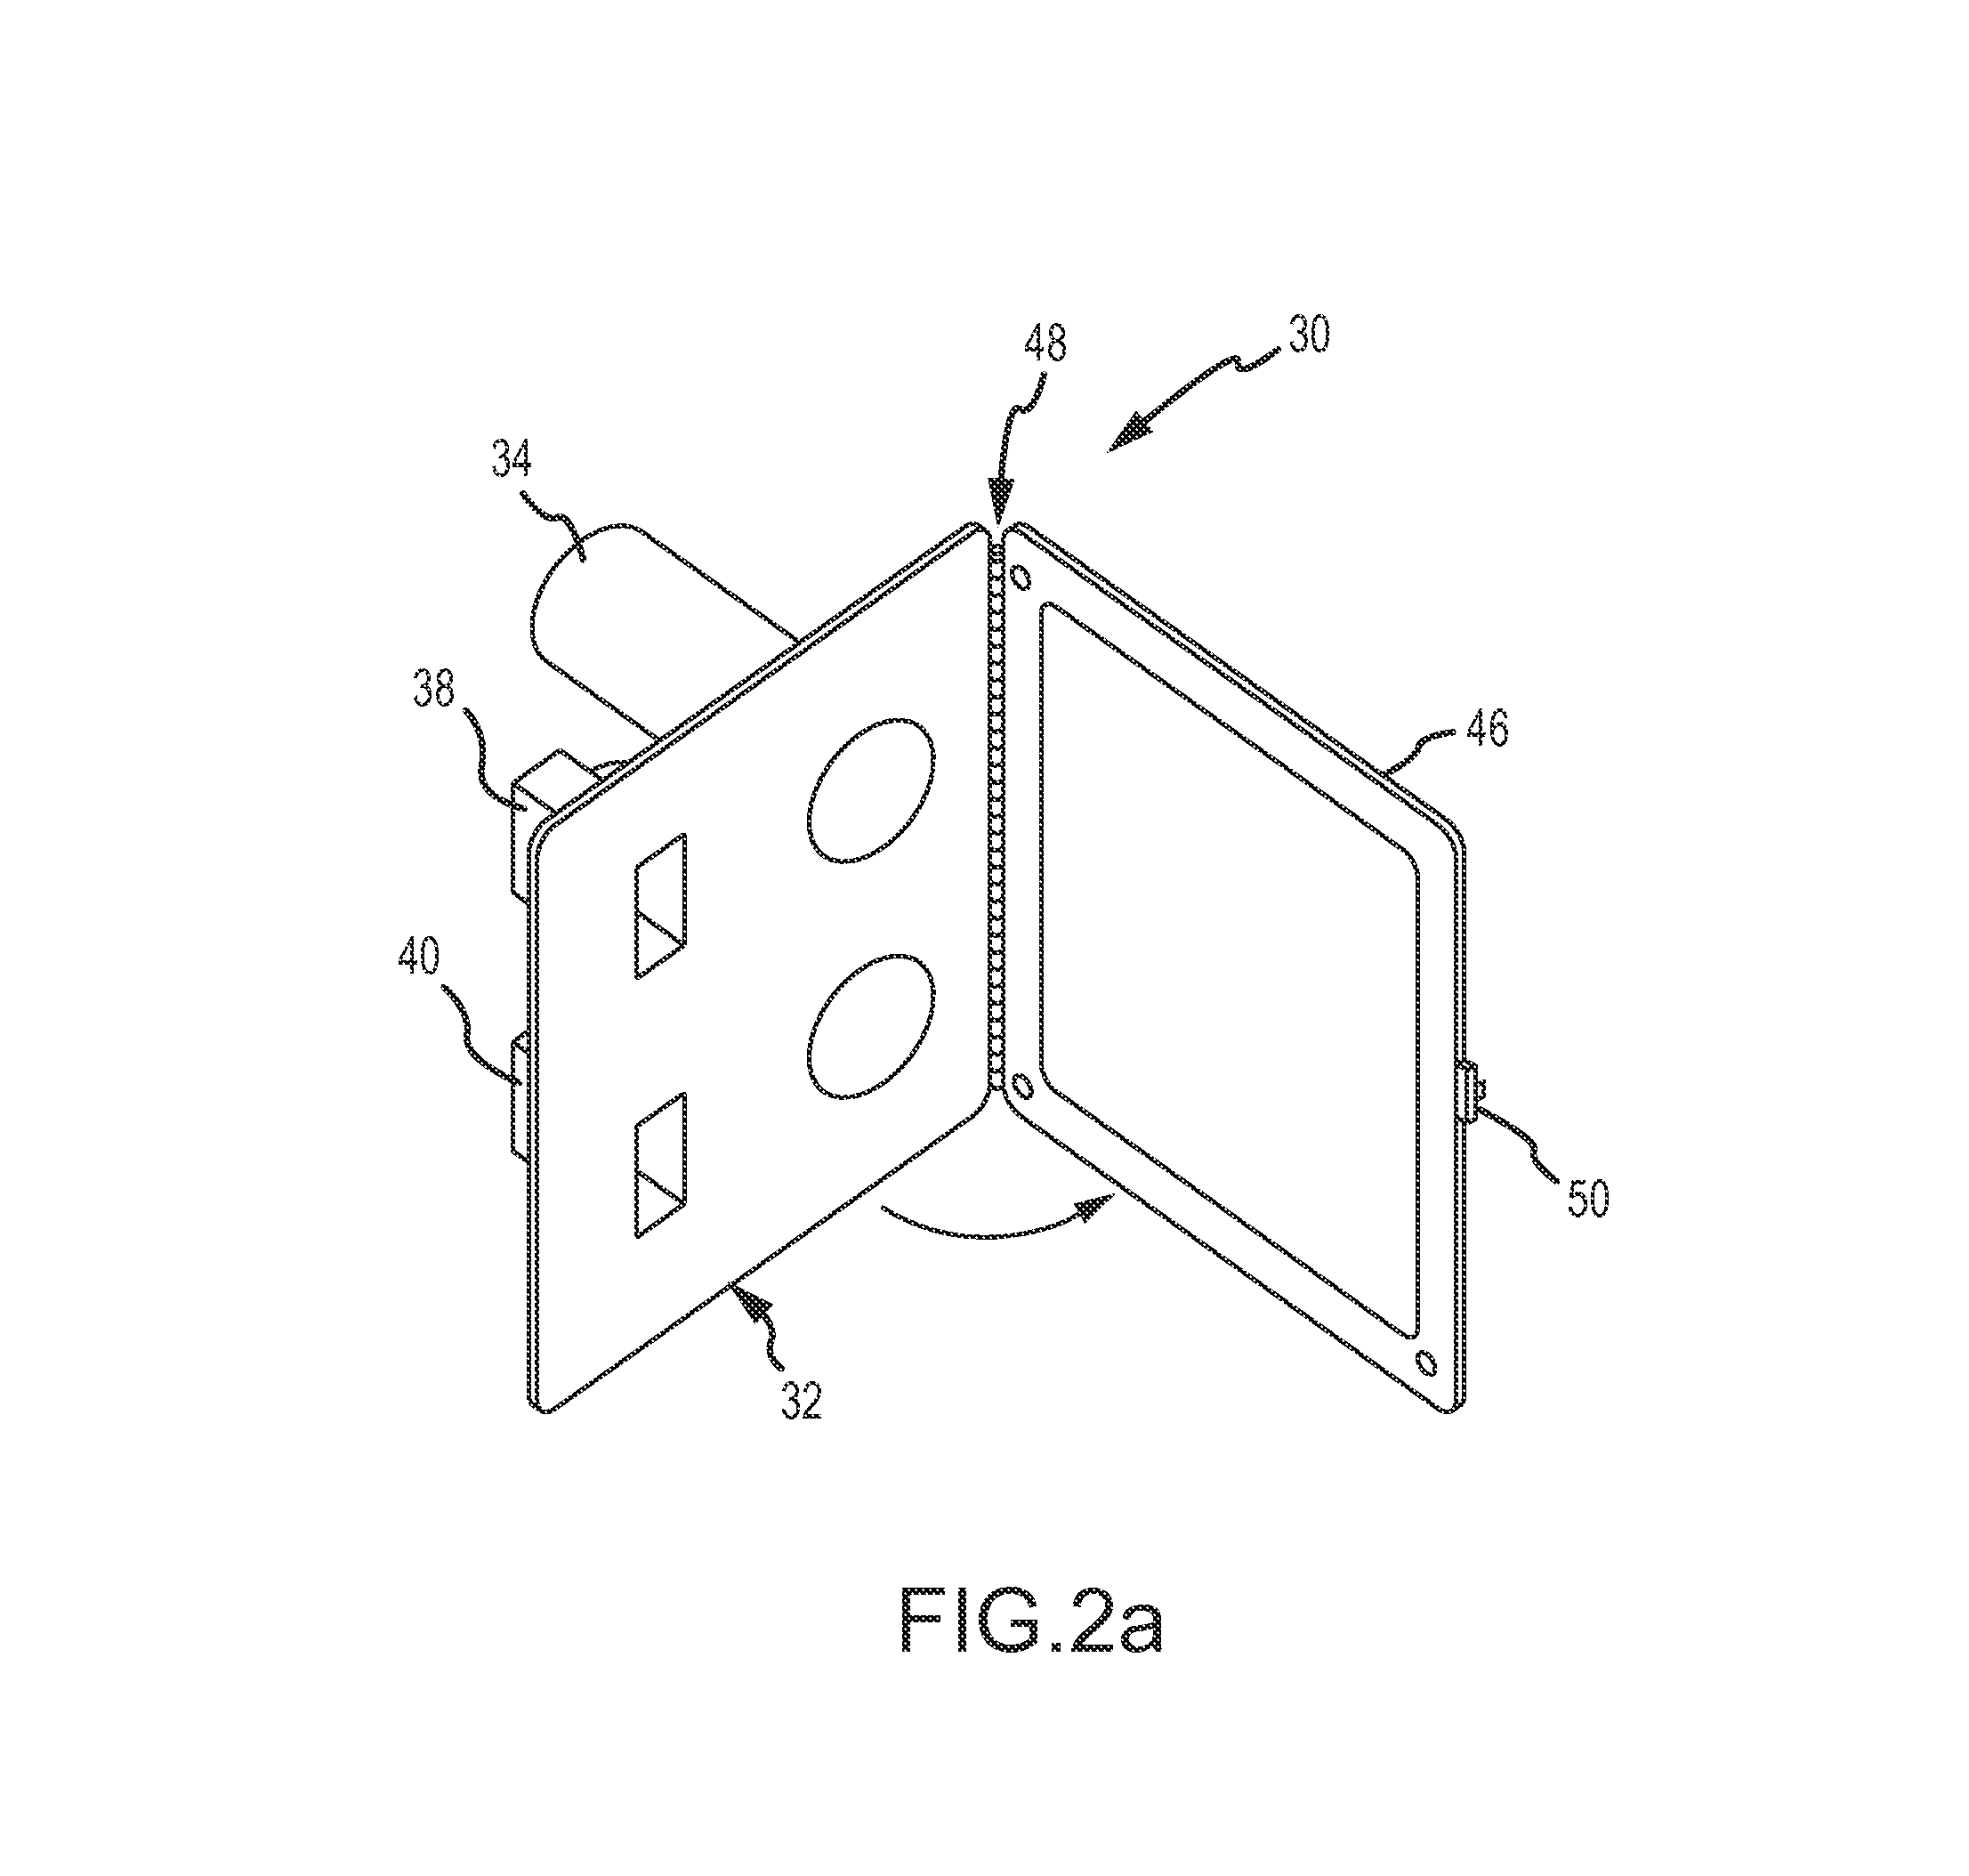 Remote actuation system for a human/machine interface